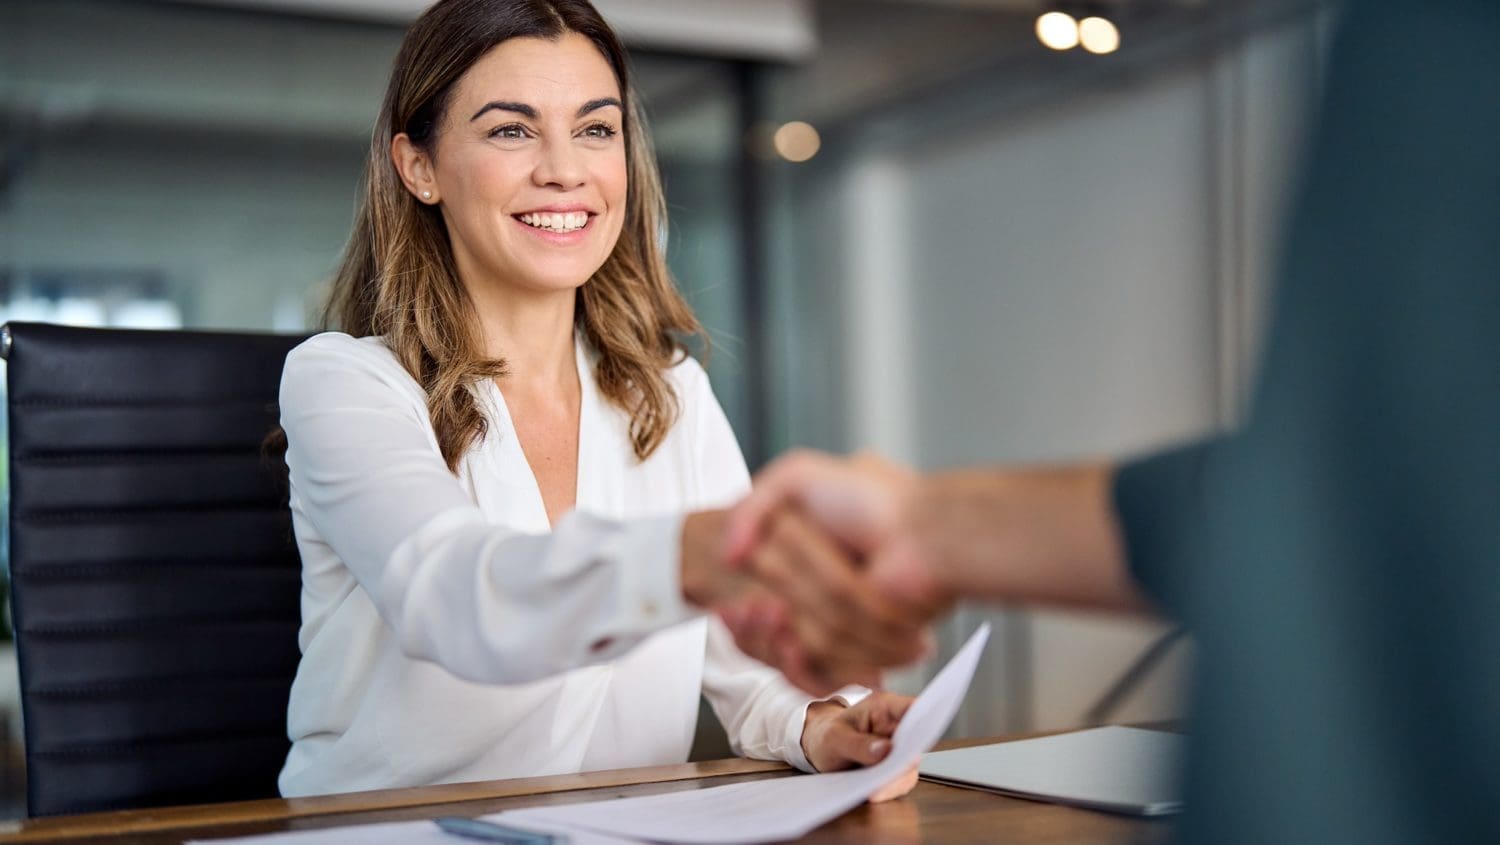 A woman shaking hands with a man at a desk in the presence of reputation management consultants.